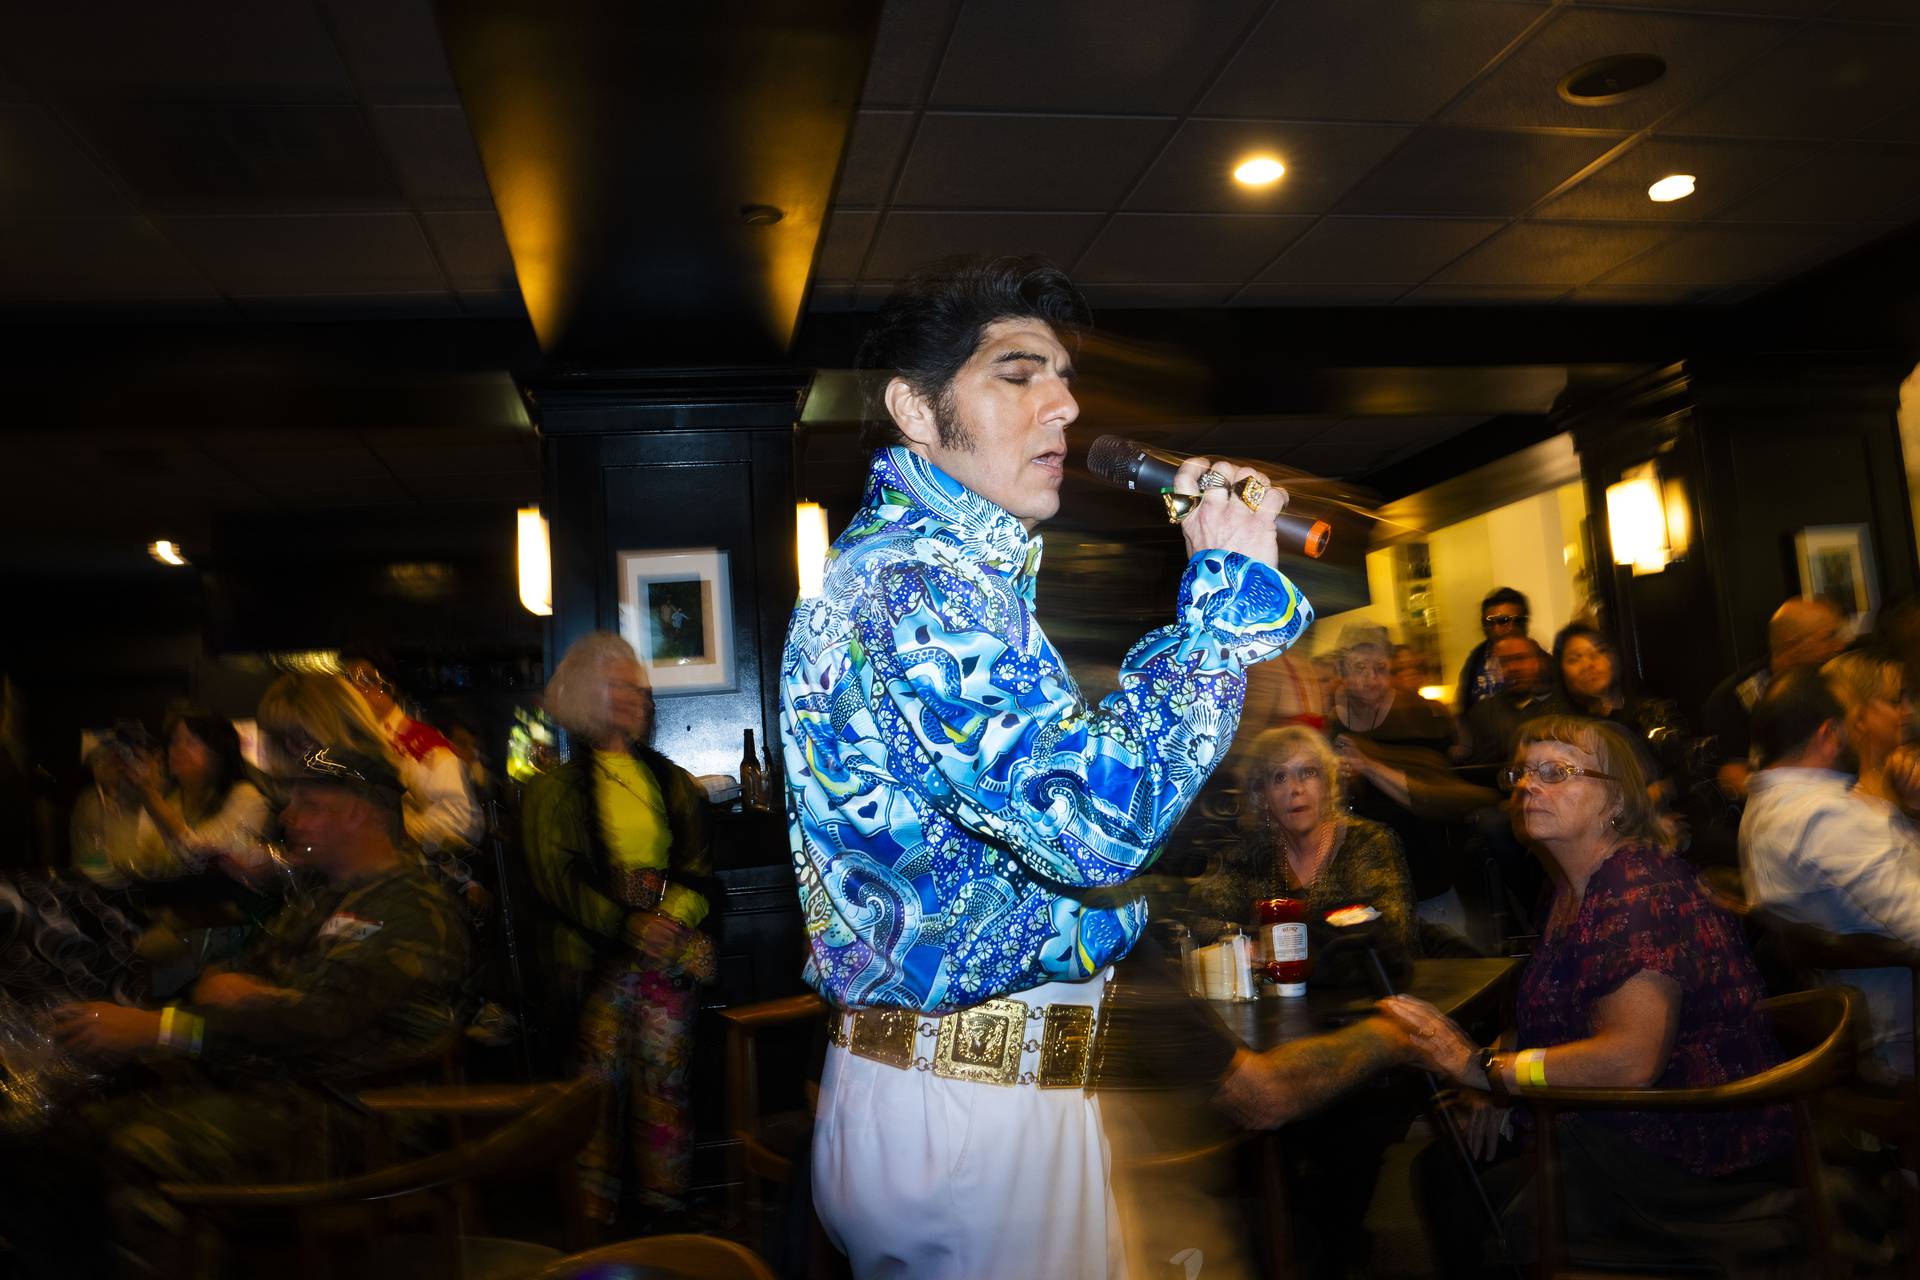 An Elvis fan wears his name around their neck during the performances